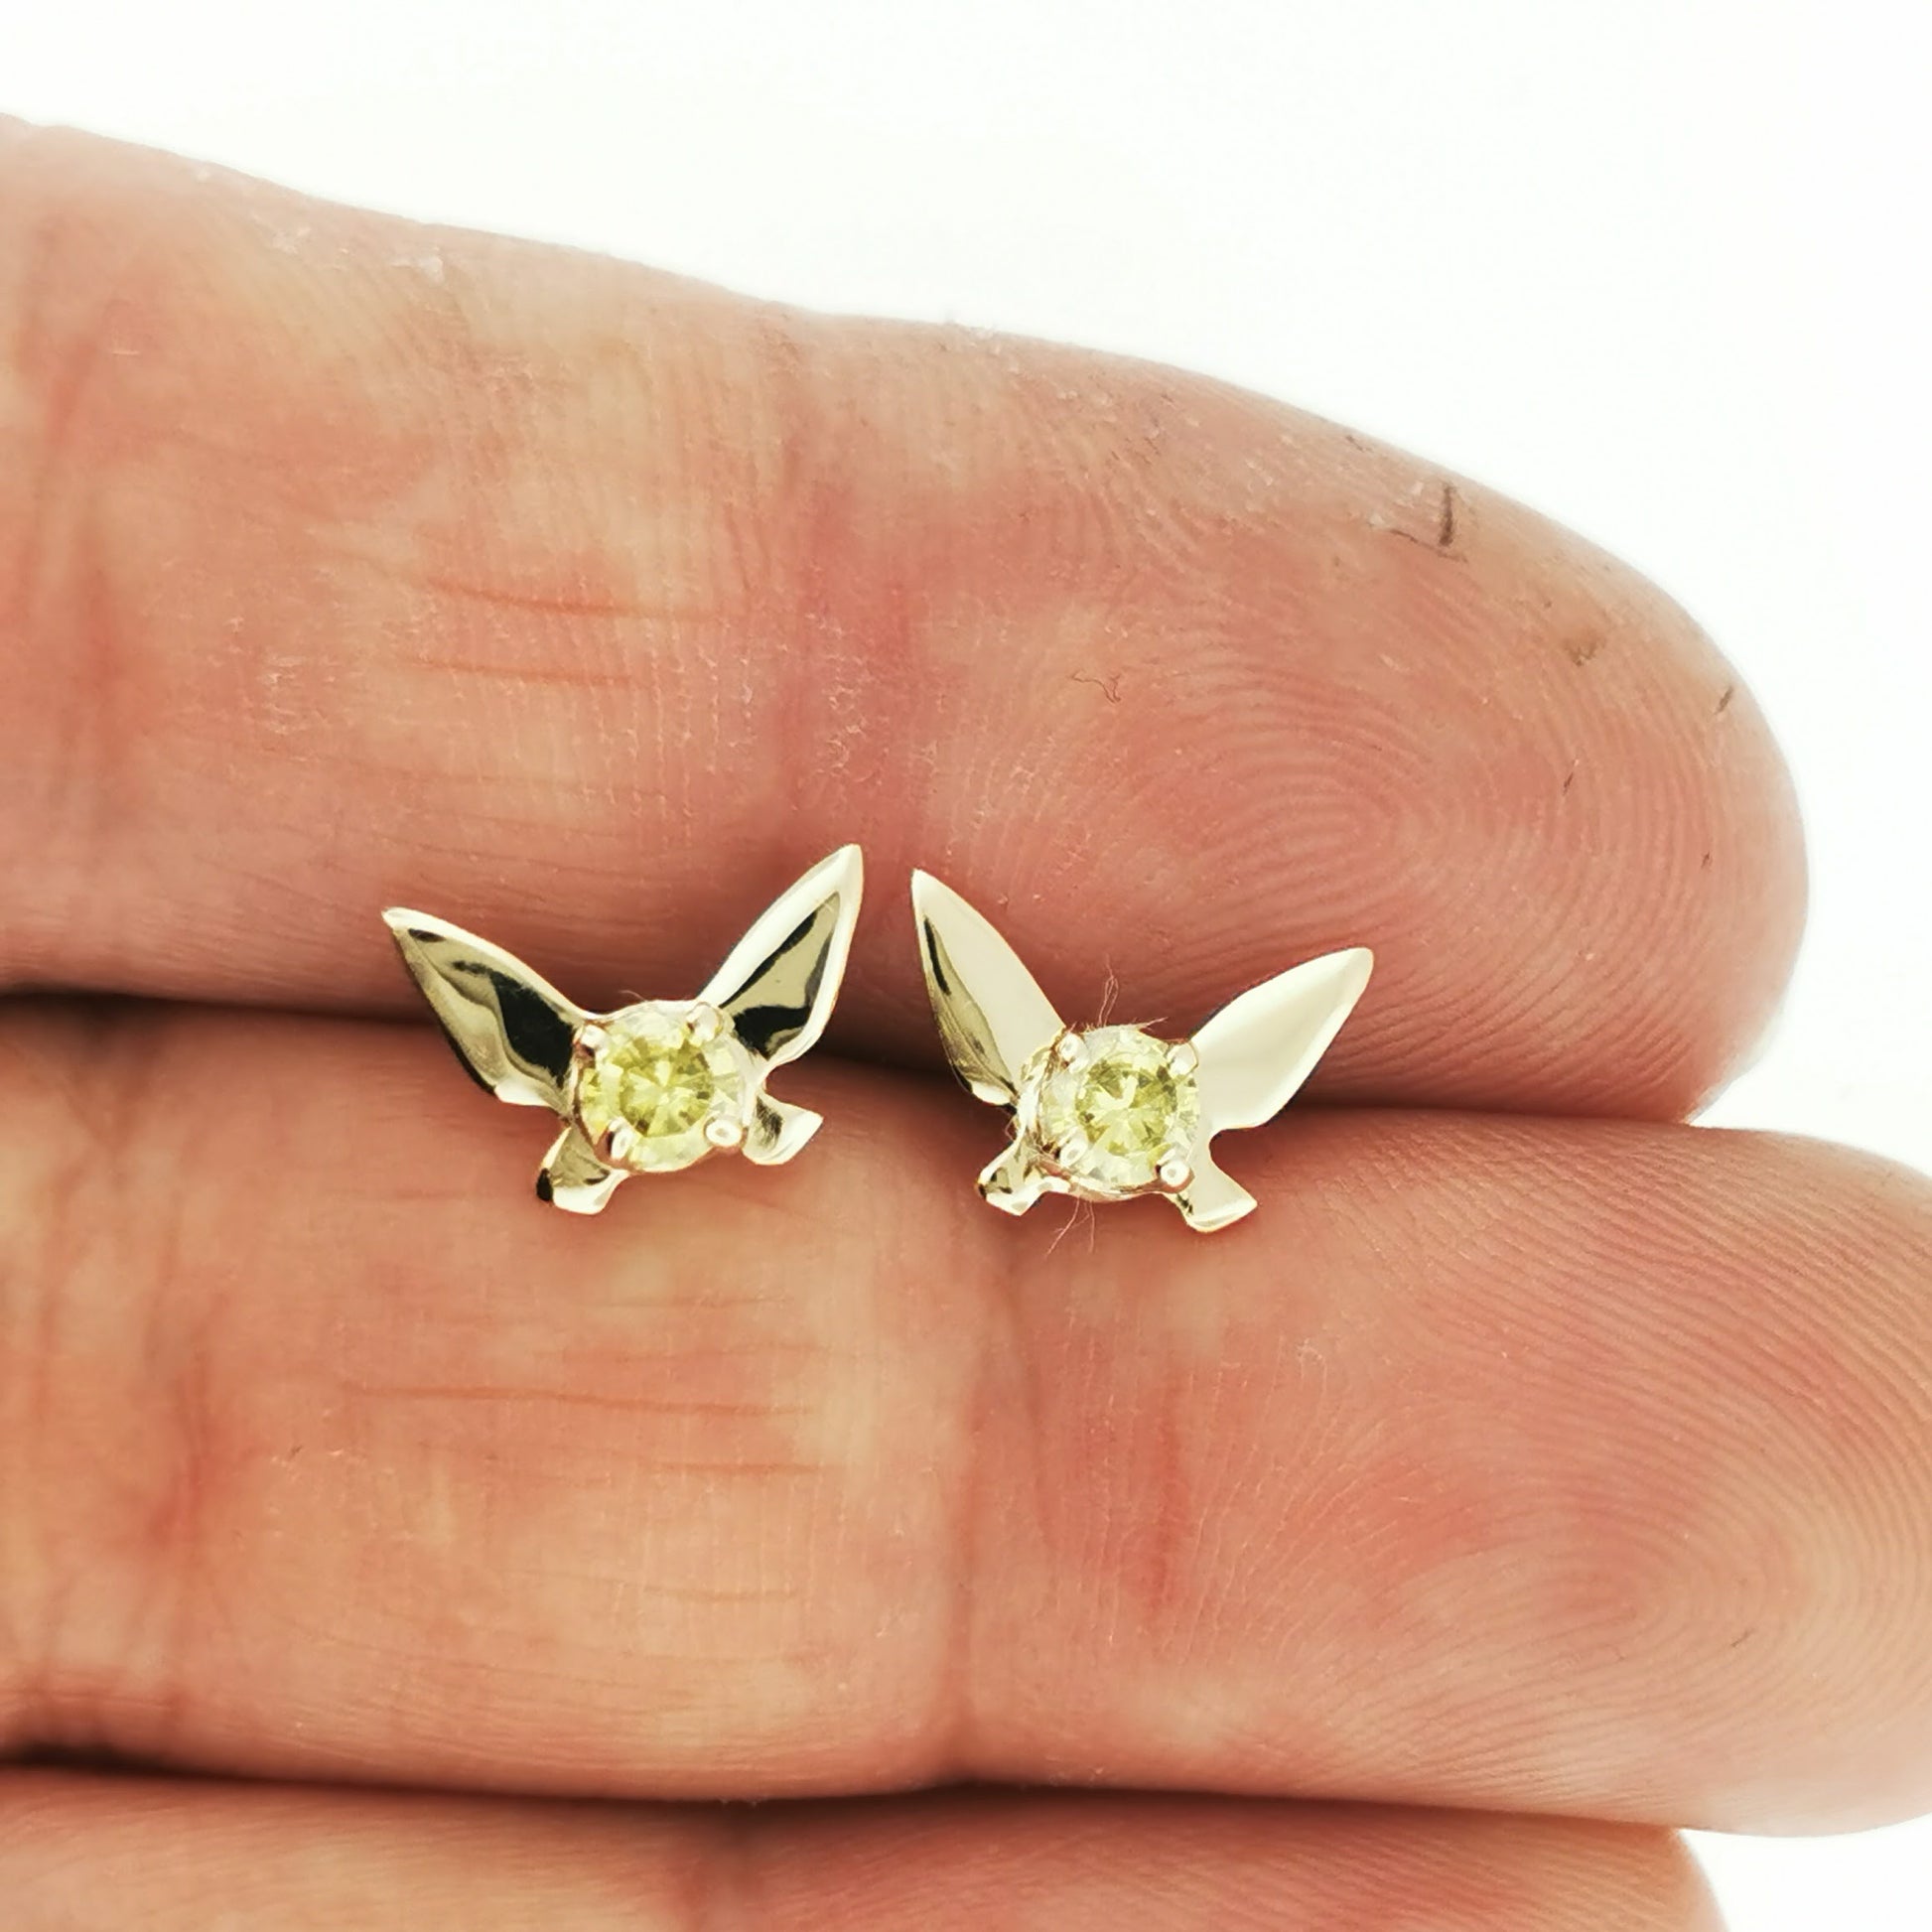 Gold Legend of Zelda Navi Fairy Earrings made to order, Precious Metal Geekery, Video Game Jewelry, Video Game Jewellery, Navi Fairy Earrings, Gold Navi Earrings, Gold Zelda Earrings, Gold Navi Studs, Gold Navi Stud Earrings, Gold Zelda Stud Earrings, Gold Zelda Jewelry, Gold Zelda Jewellerey, Geeky Gift For Her, Gold Geek Earrings, Gold Fairy Earrings, Everyday Cosplay Jewelry